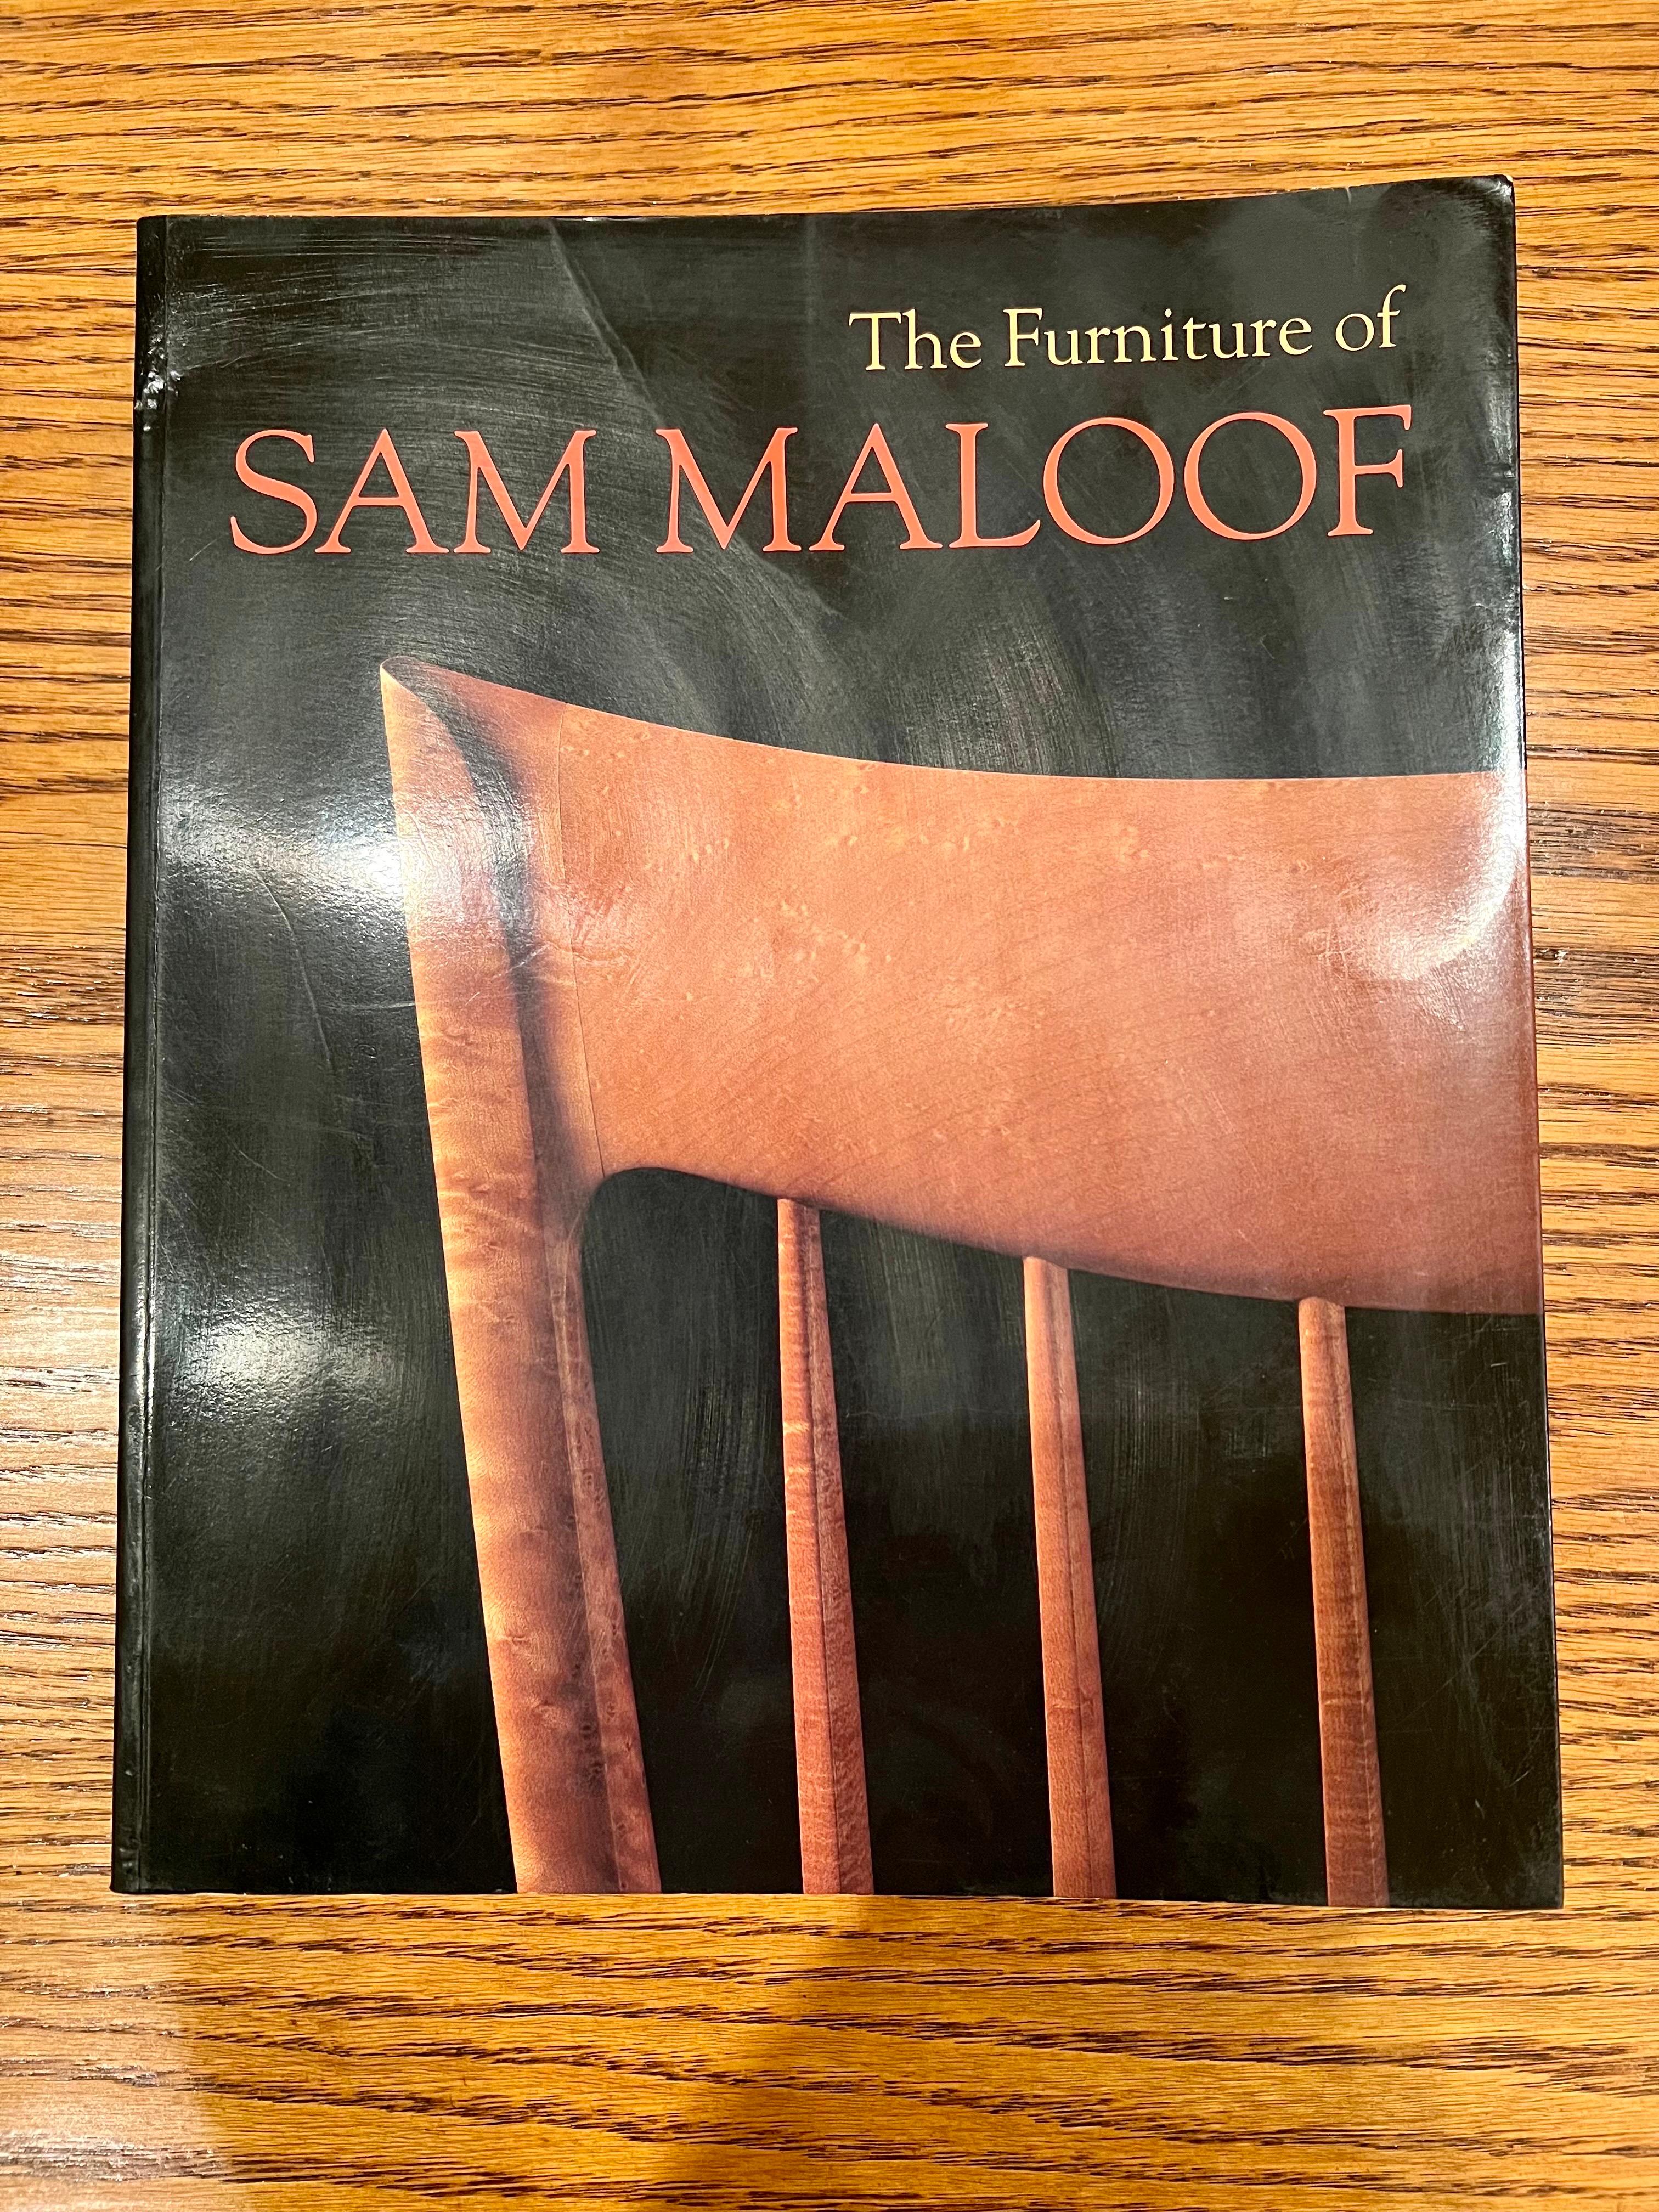 Beautiful illustrations signed and dated by Sam Maloof 2002 nice clean condition.